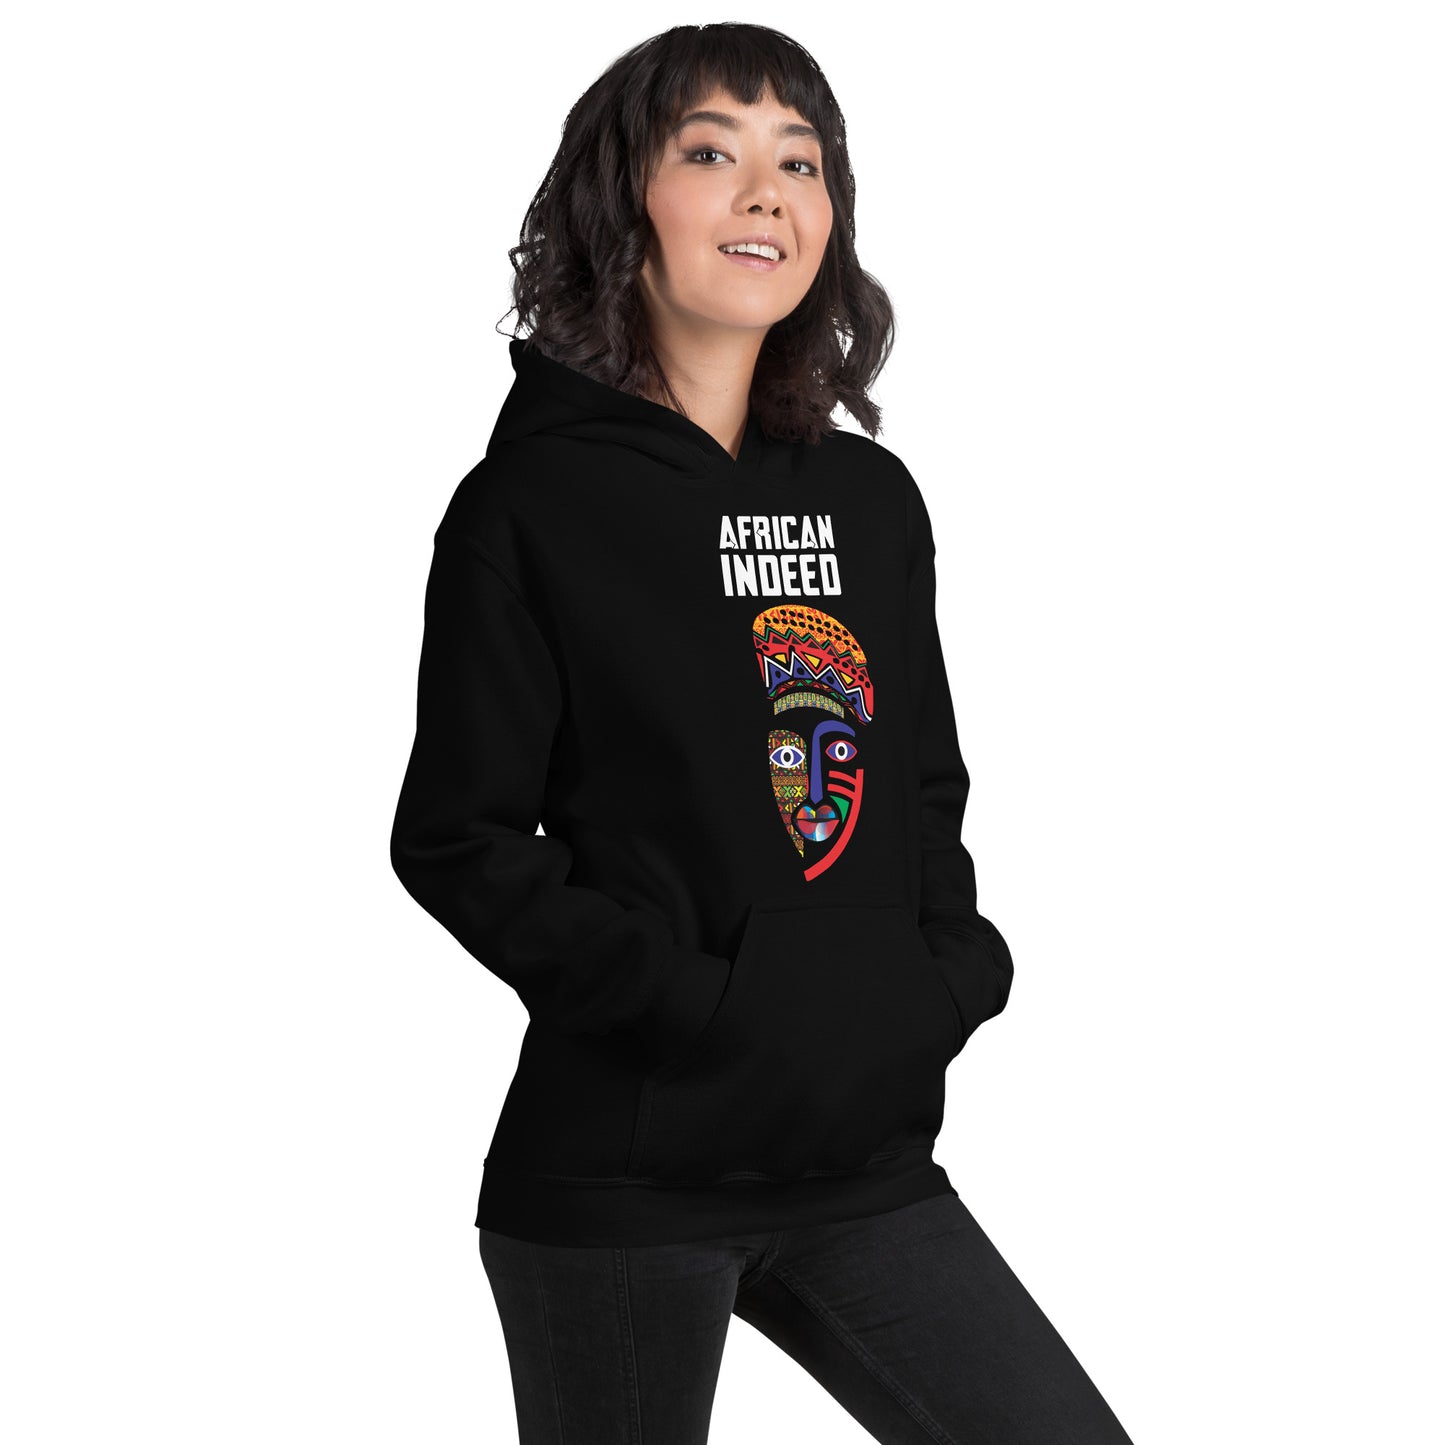 African Indeed Pullover Hoodie